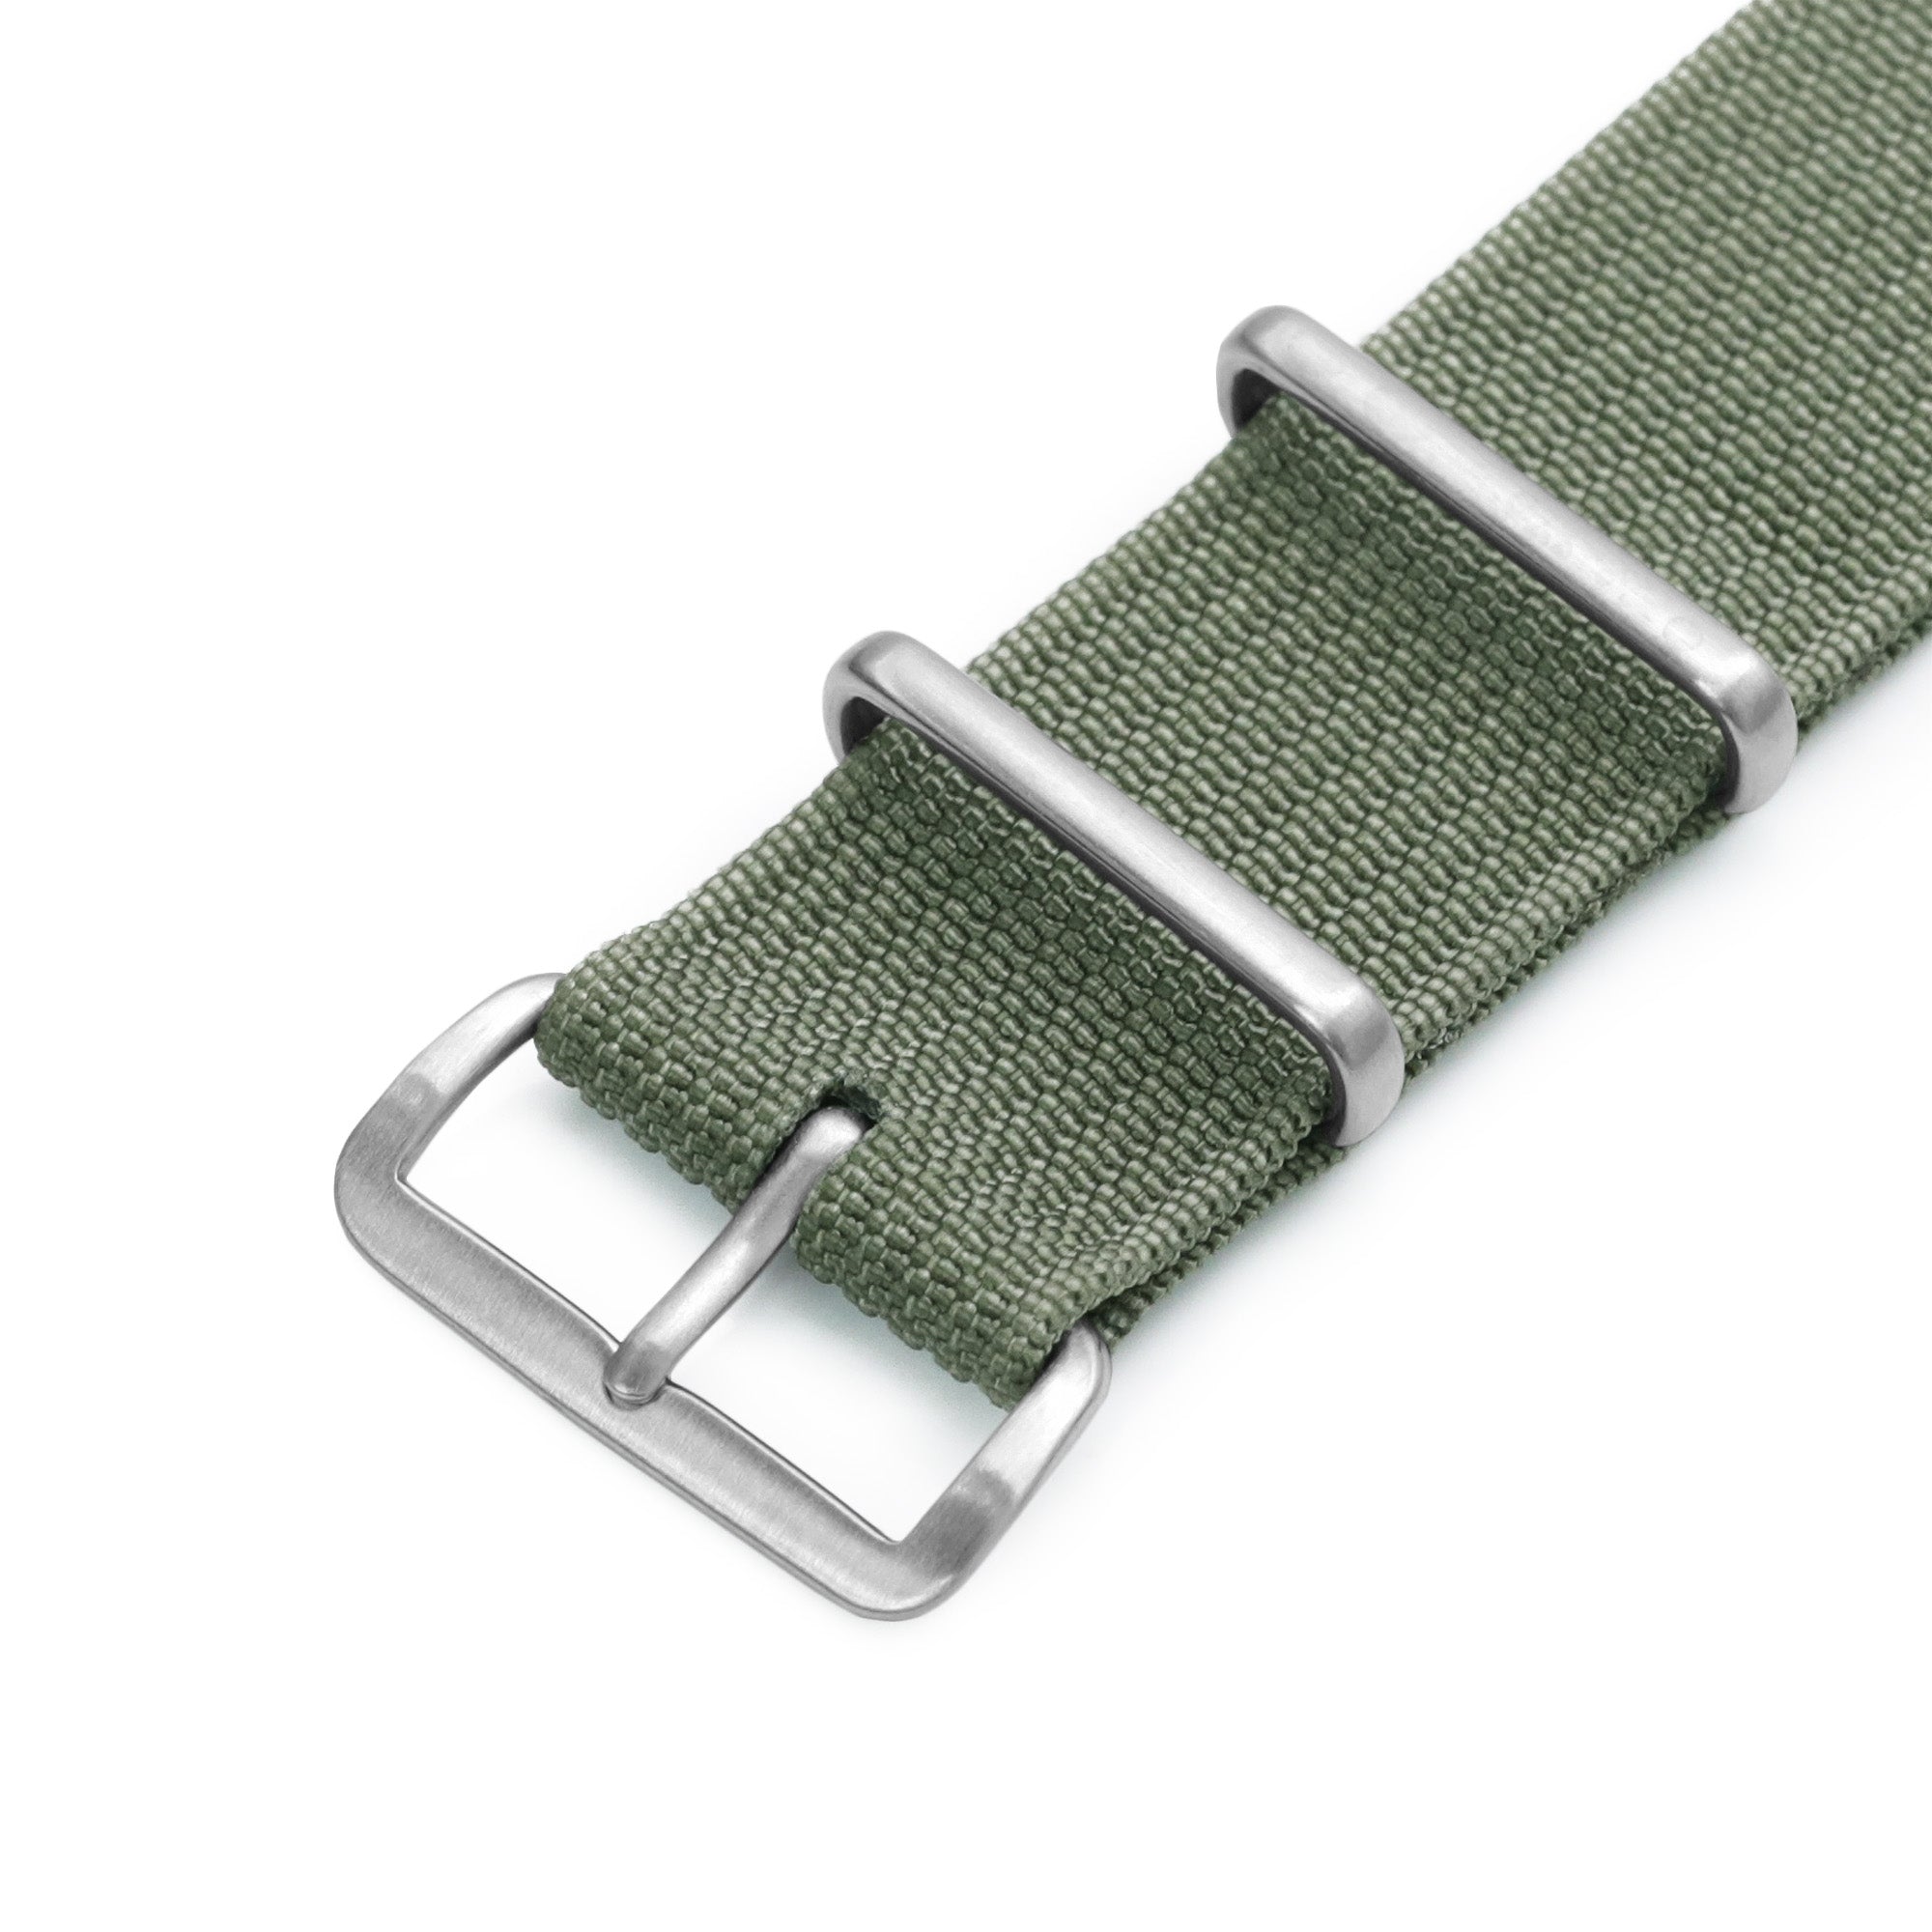 Ribbed Nylon One-piece Watch Strap Brushed Buckle, Military Green